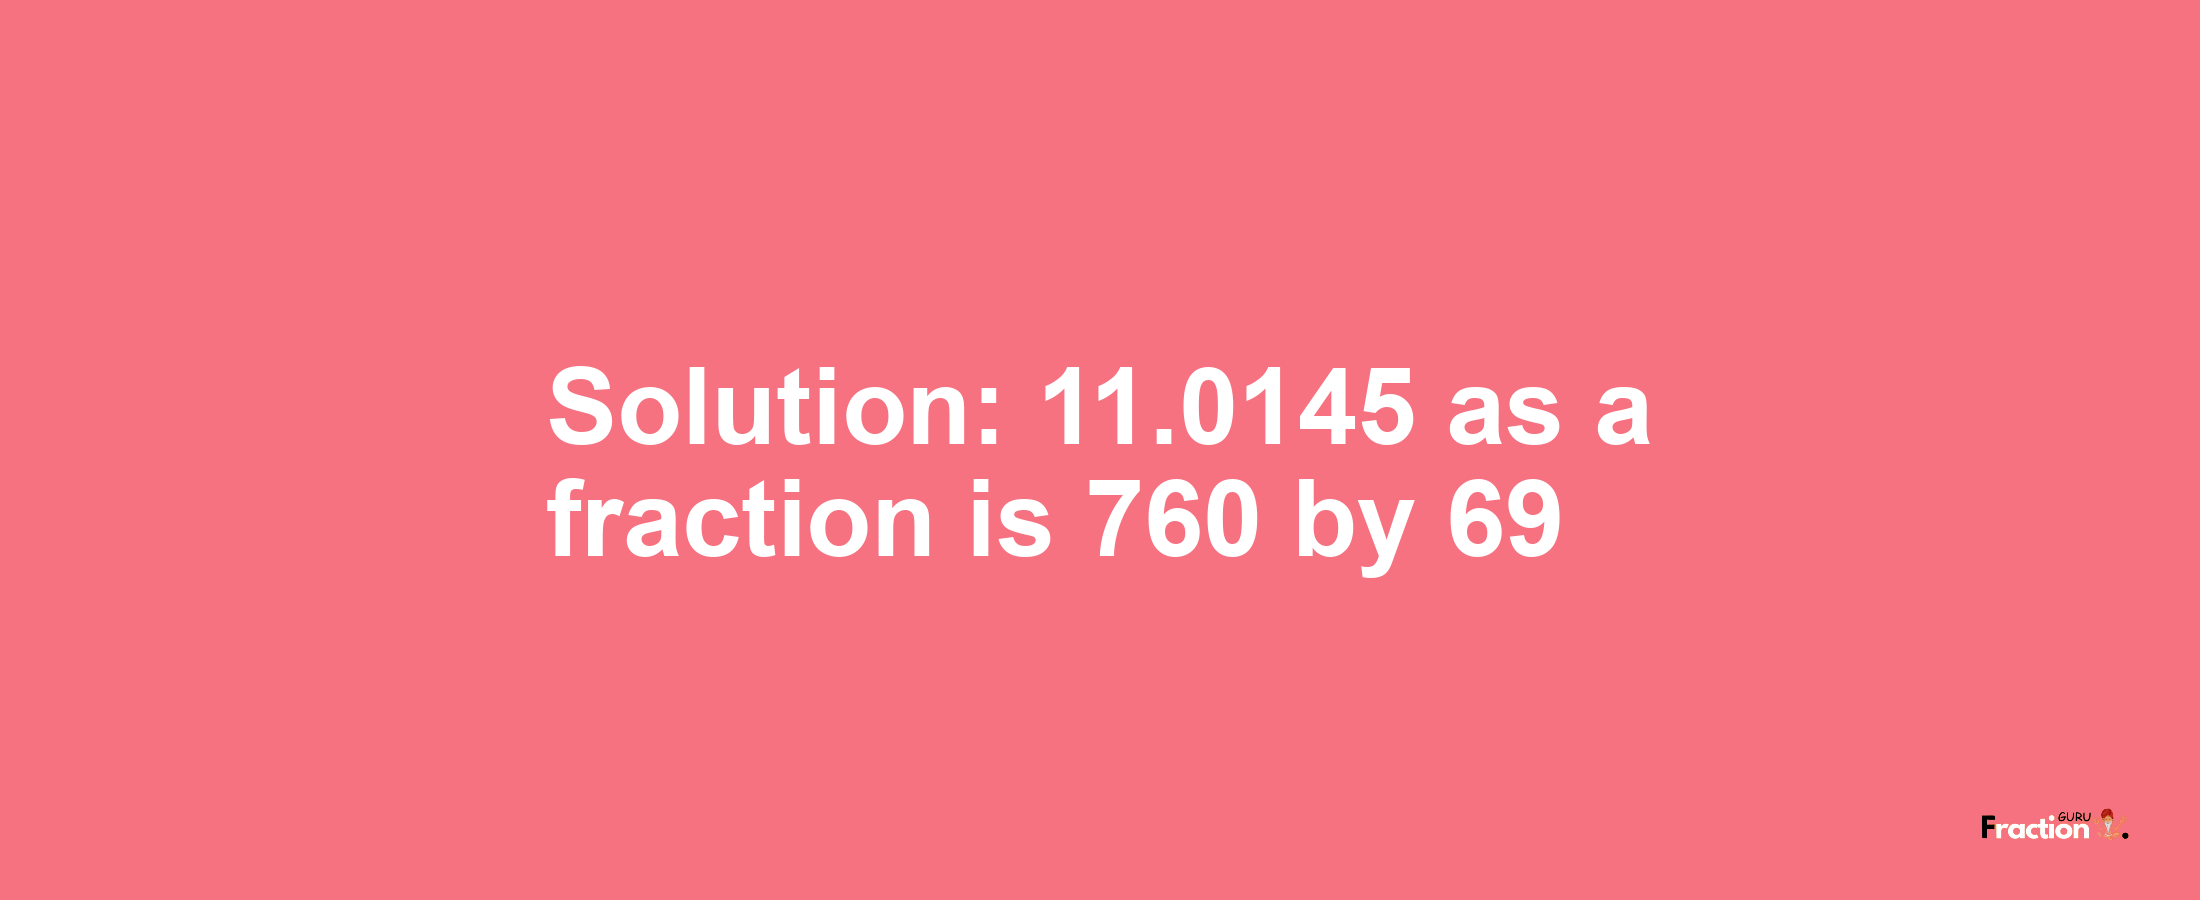 Solution:11.0145 as a fraction is 760/69